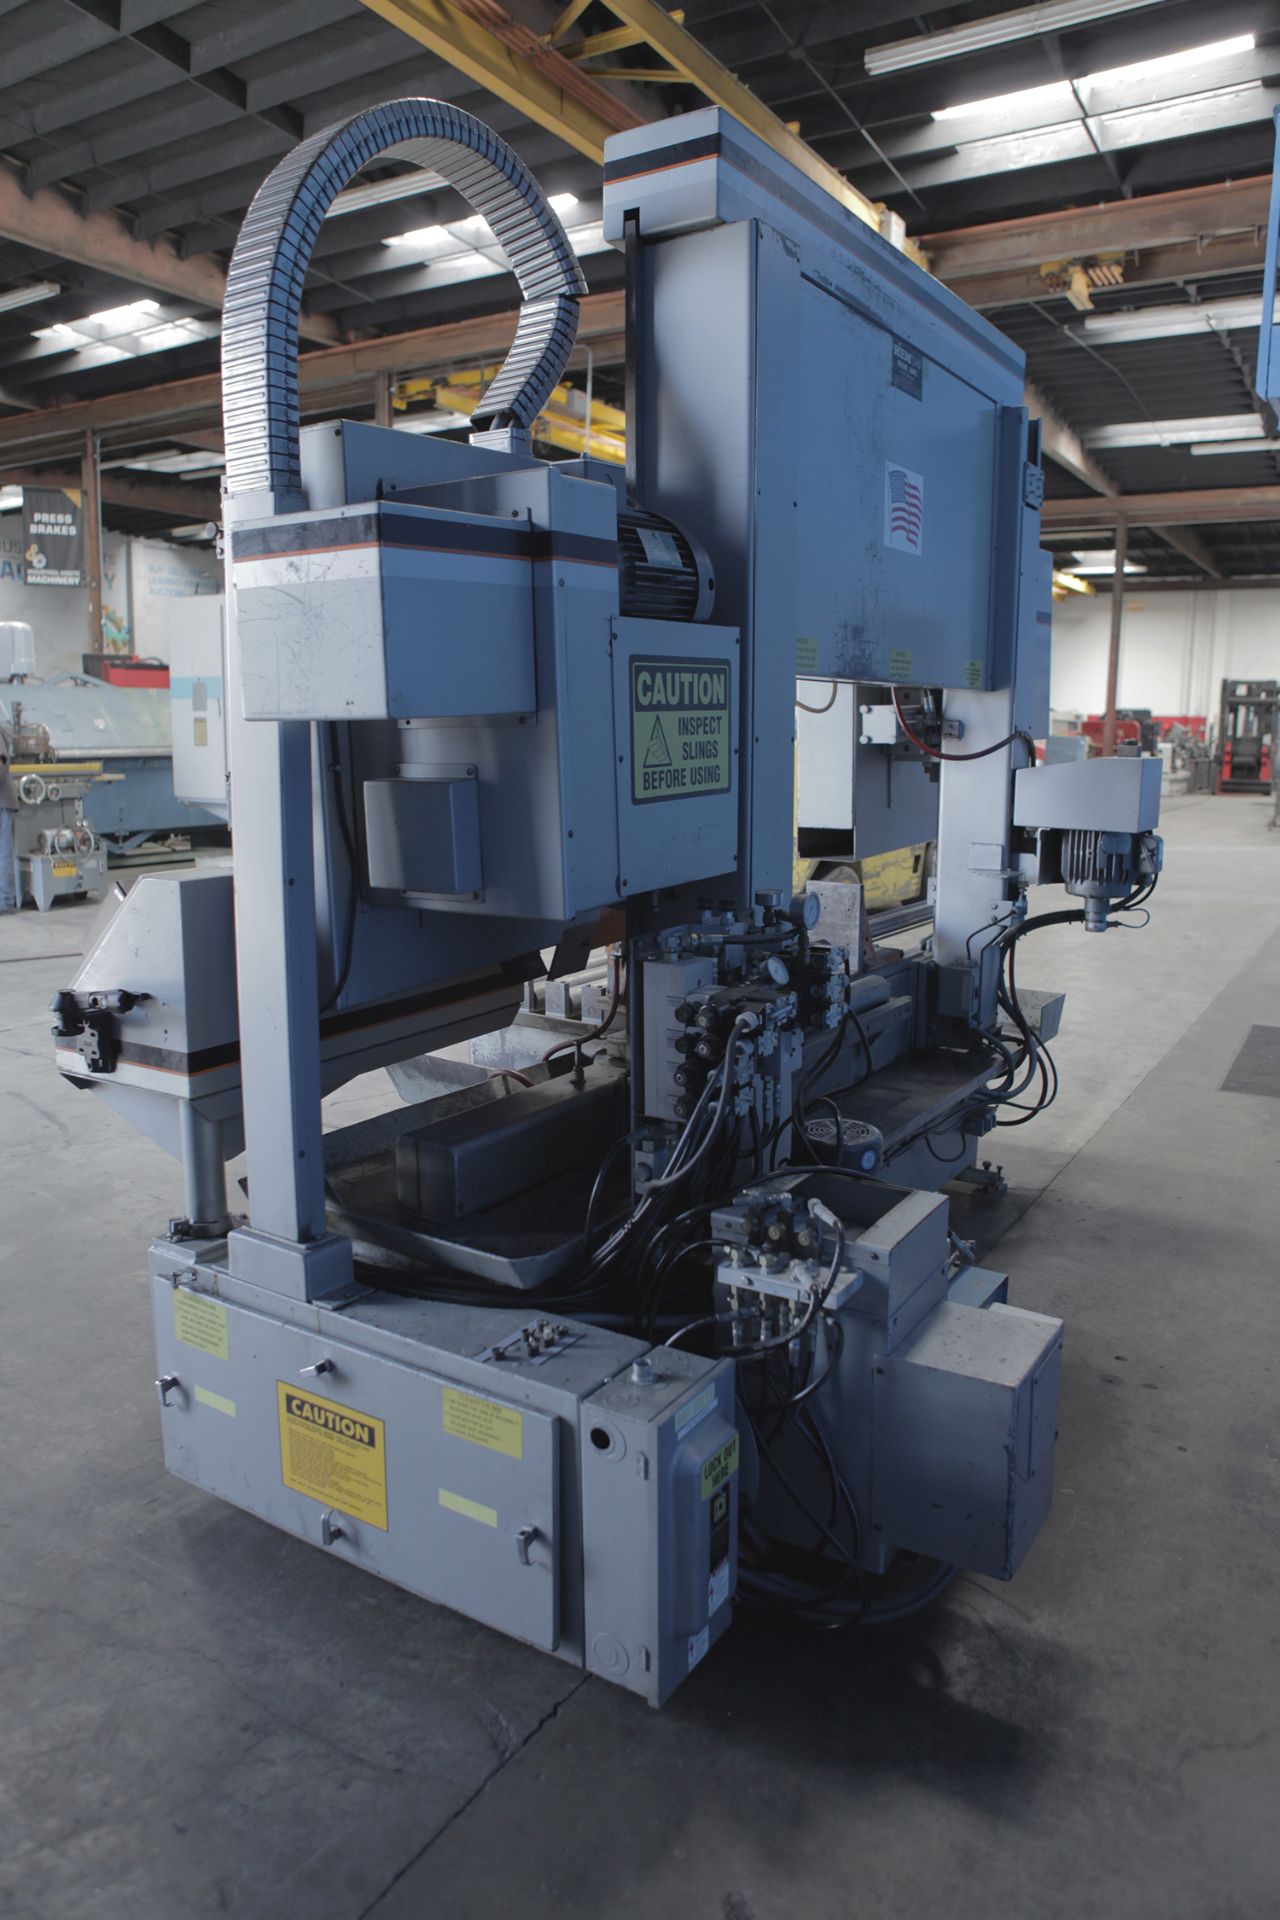 18" x 20" HEM F130HA-DC CCT Horizontal Bandsaw, Variable Speed, PLC Control, Canted Head Design, - Image 8 of 10